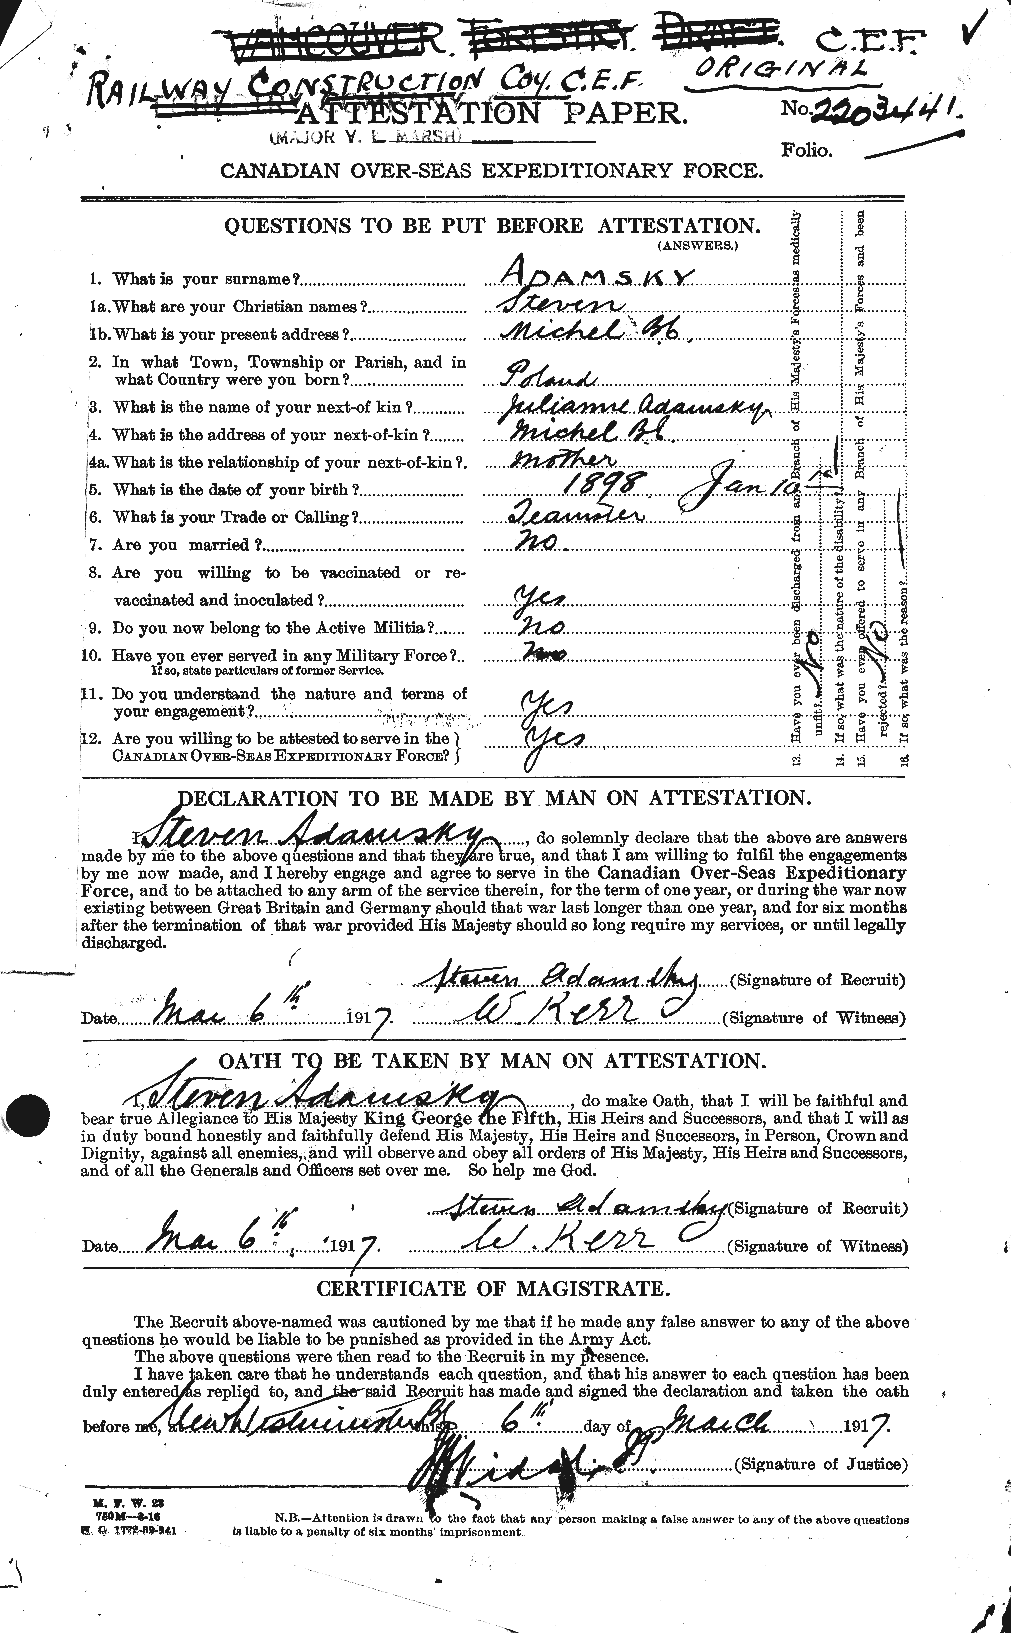 Personnel Records of the First World War - CEF 202413a